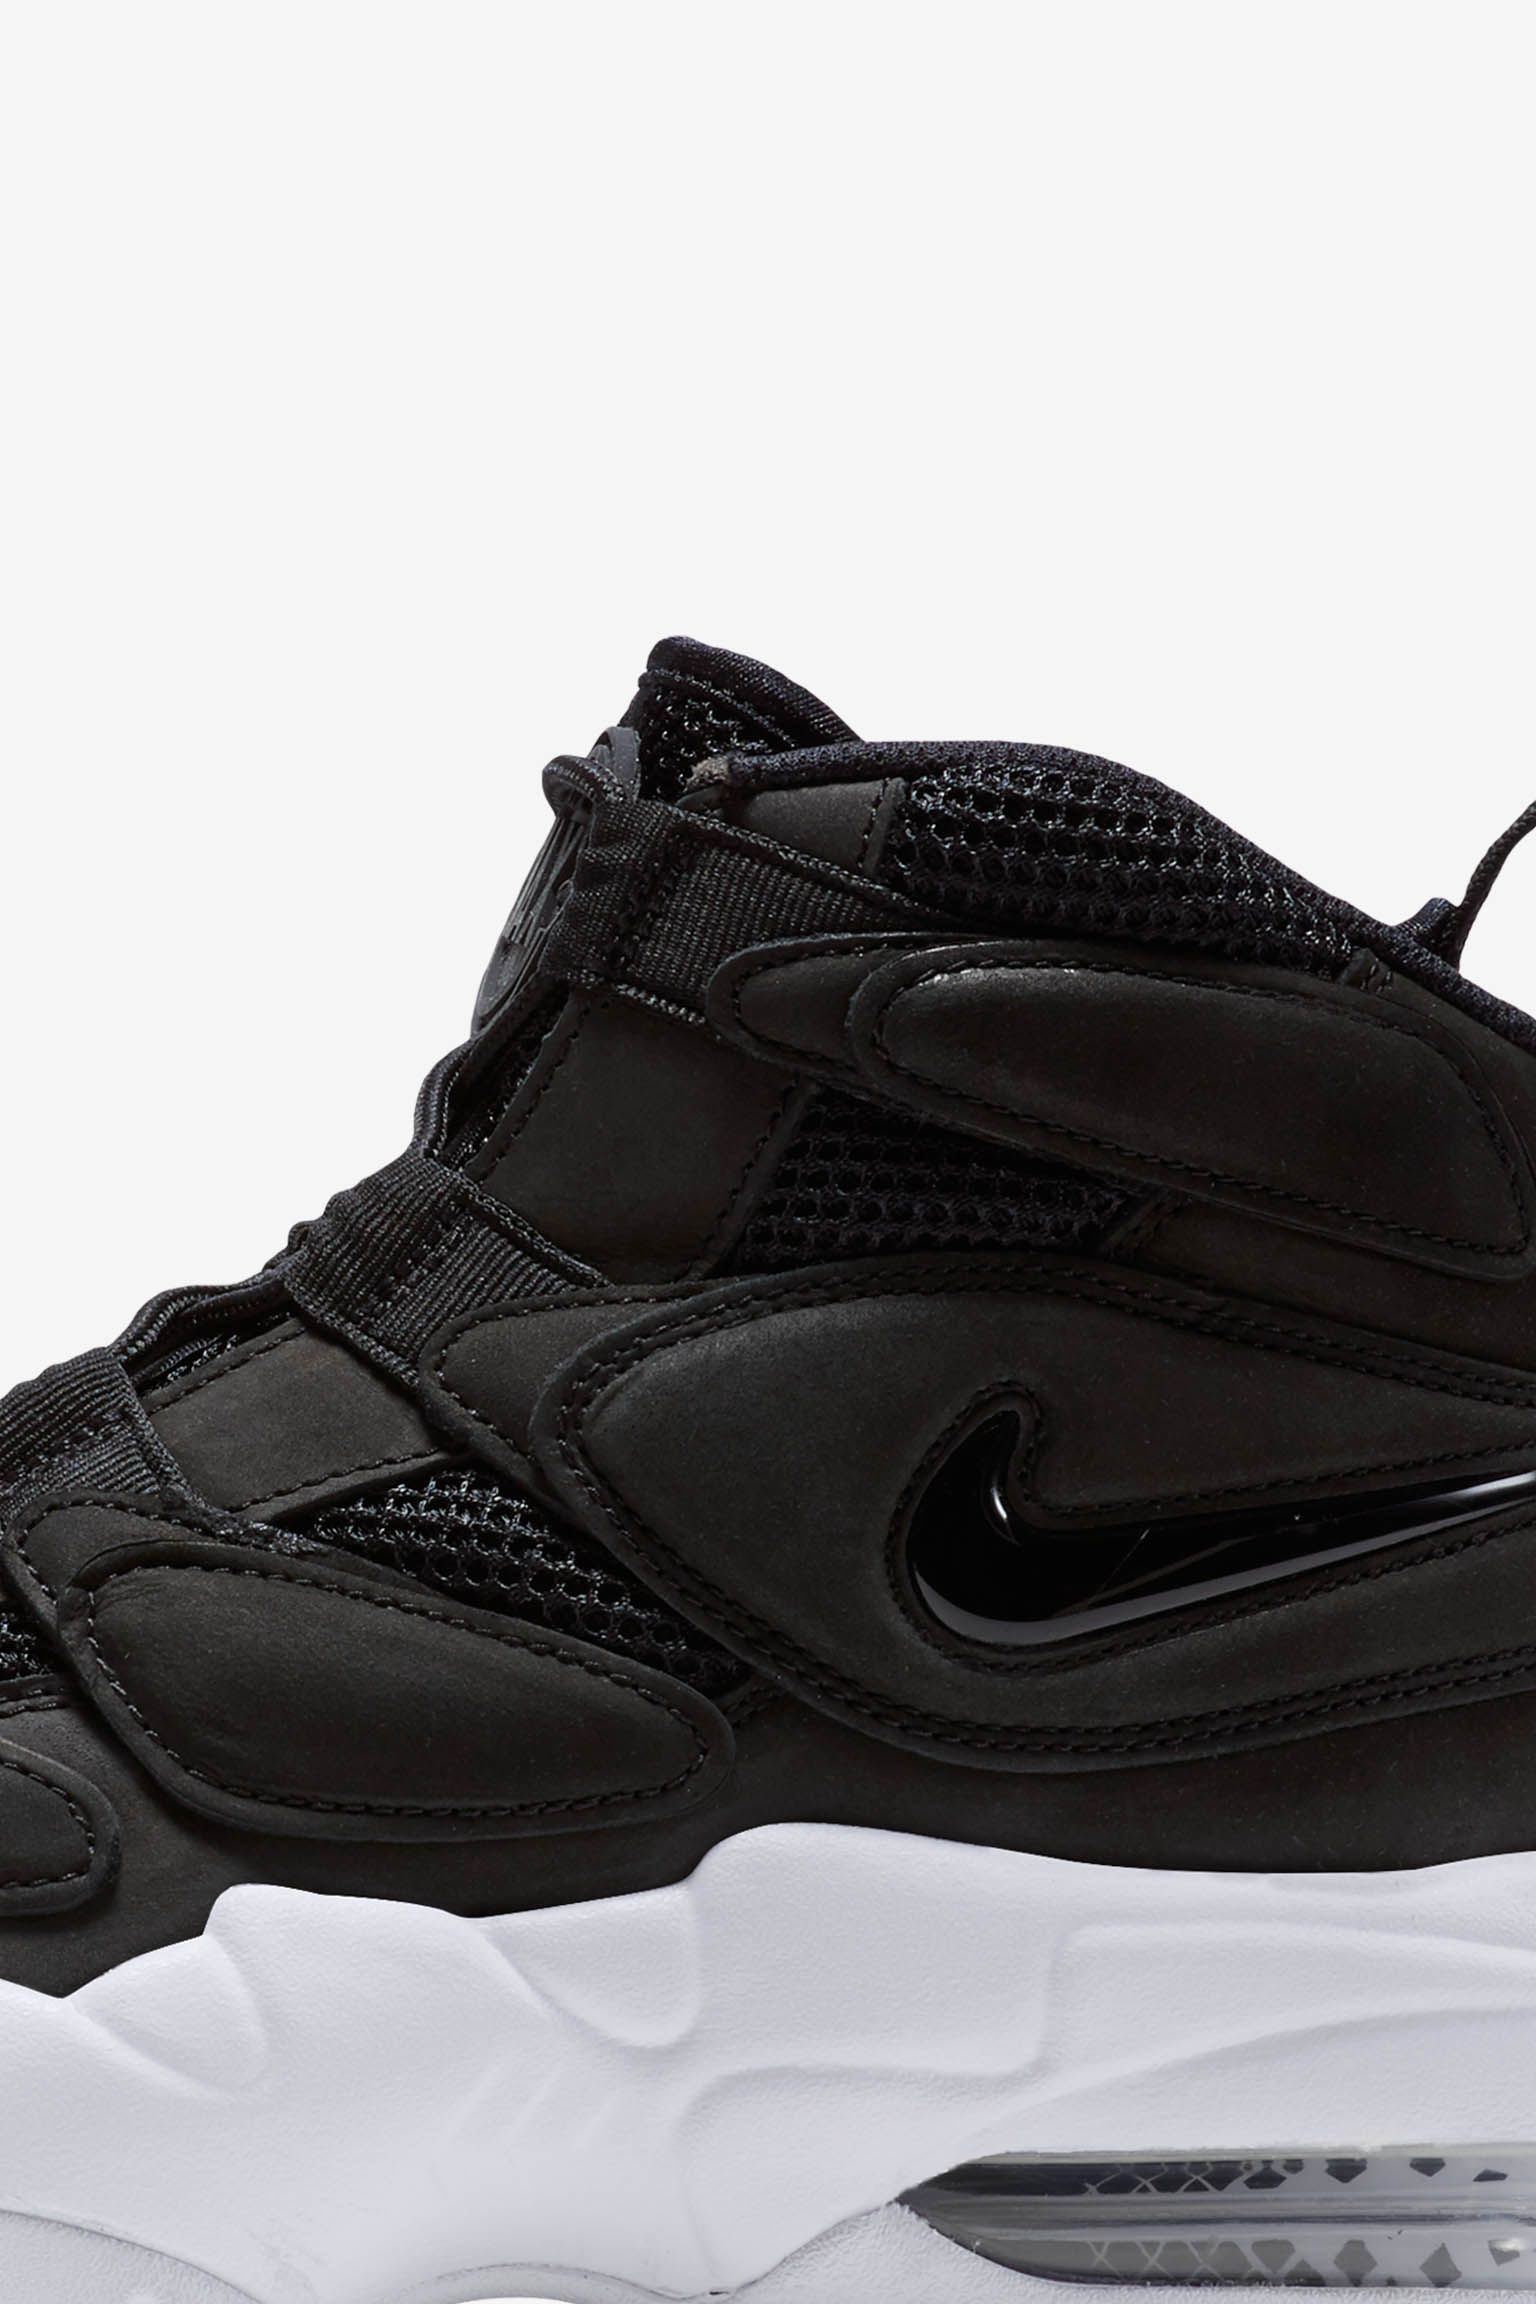 Acercarse dulce Solicitante Nike Air Max2 Uptempo 'Black &amp; White'. Nike SNKRS AT